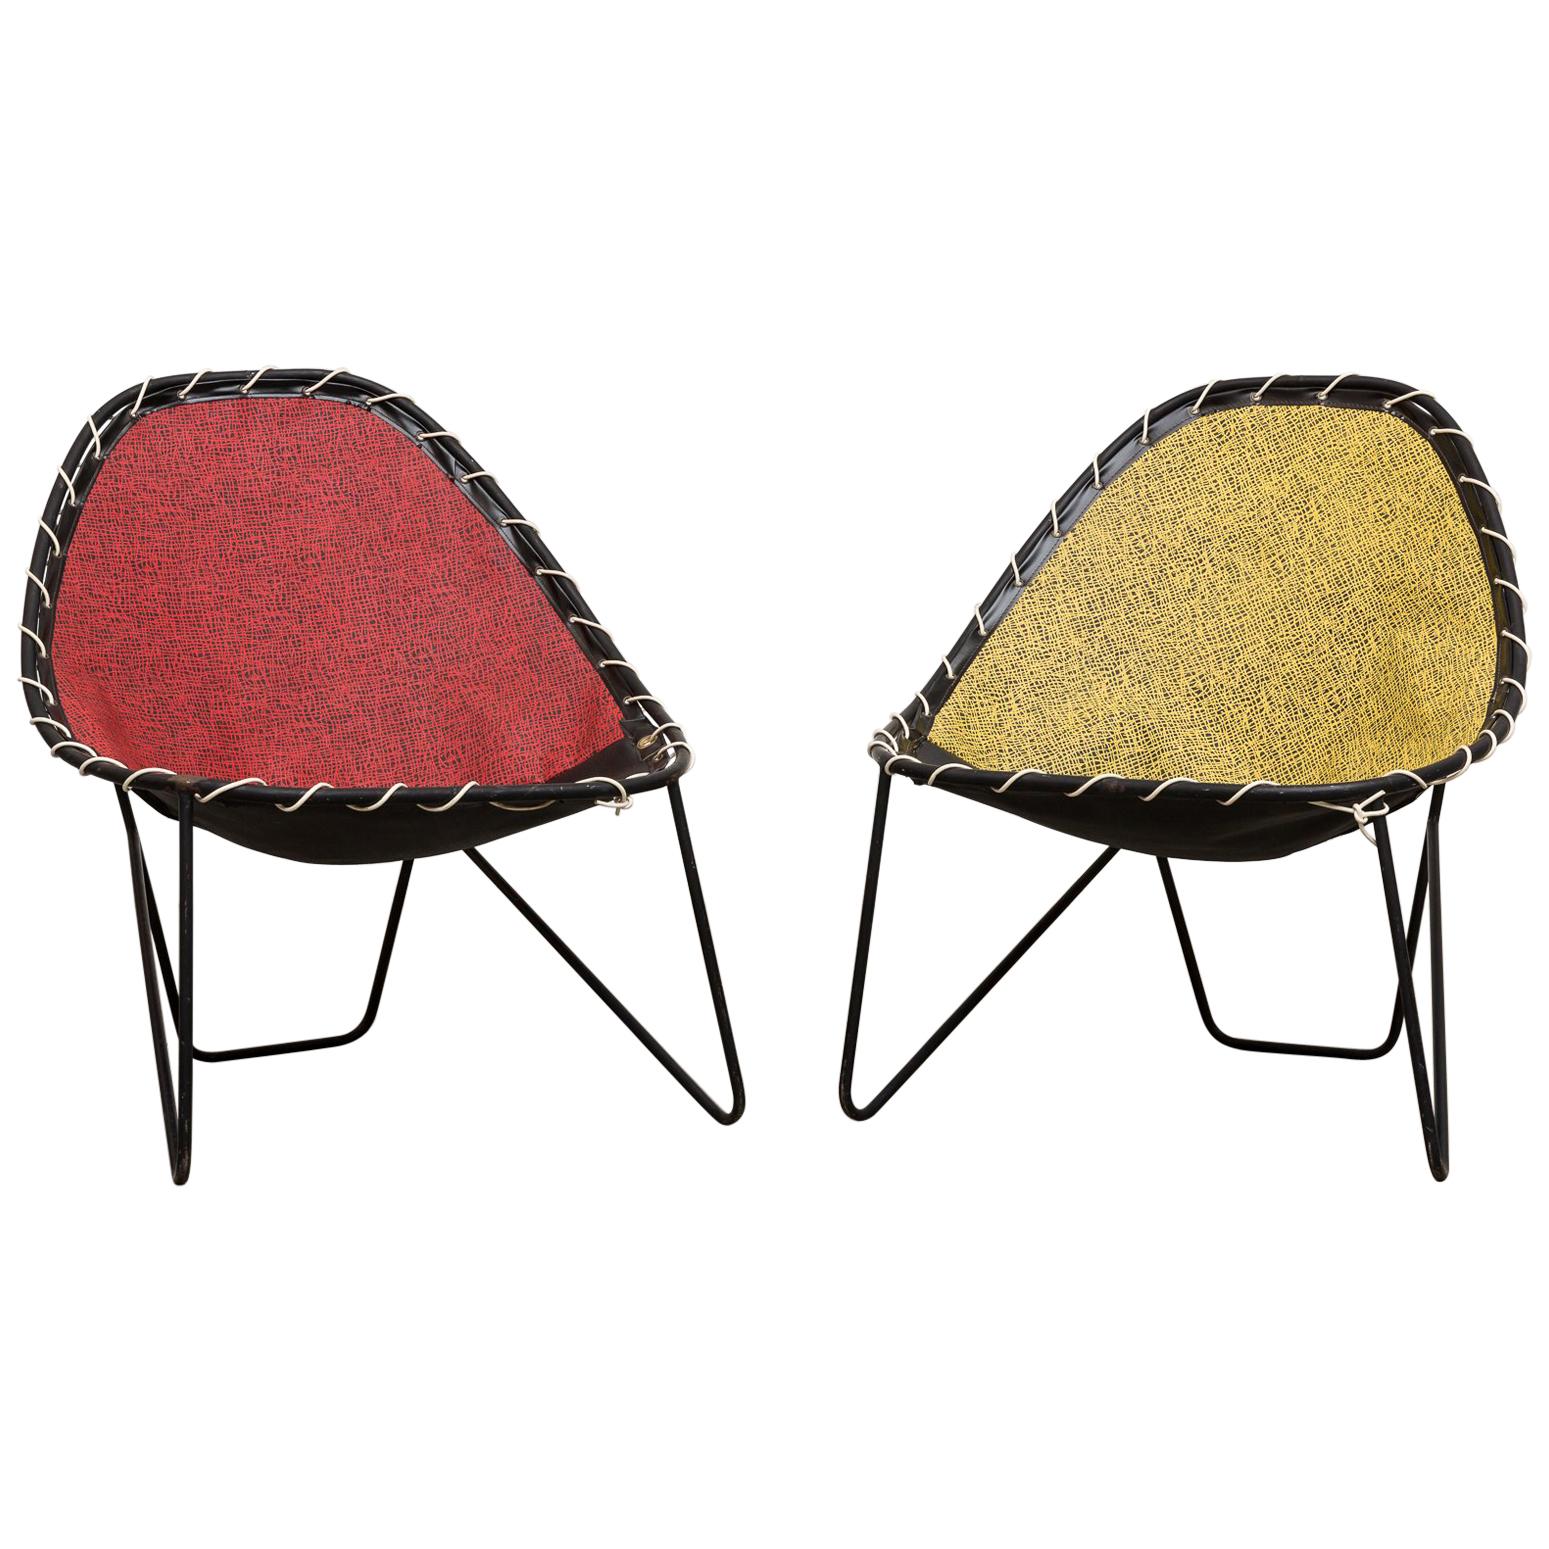 French Attributed Pair of Retro Hoop Chairs with Wire Frame